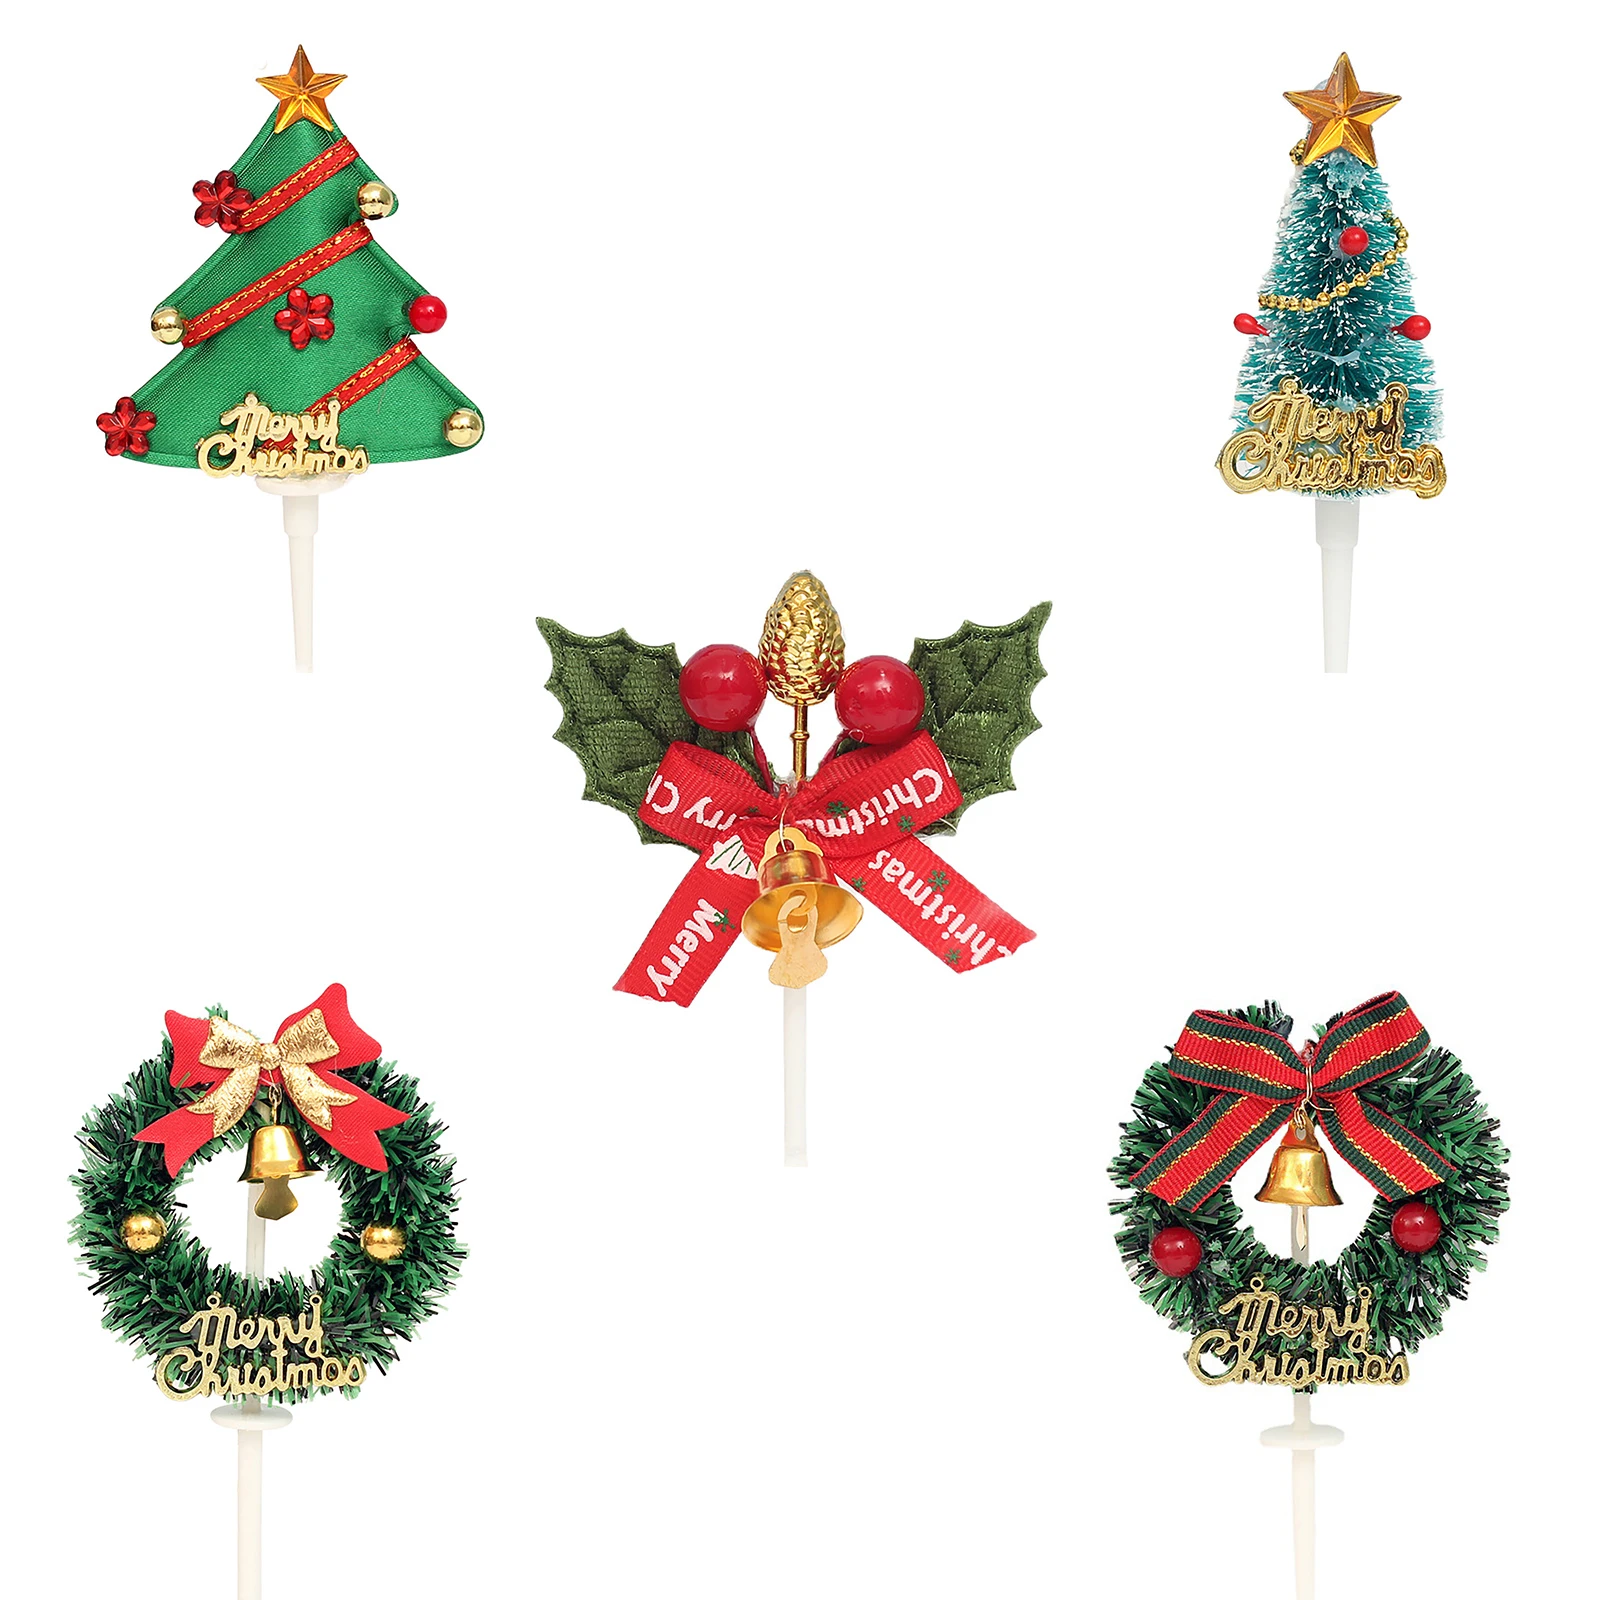 Merry Christmas Cake Topper Mini Wreath Xmas Tree Cupcake Toppers for Christmas